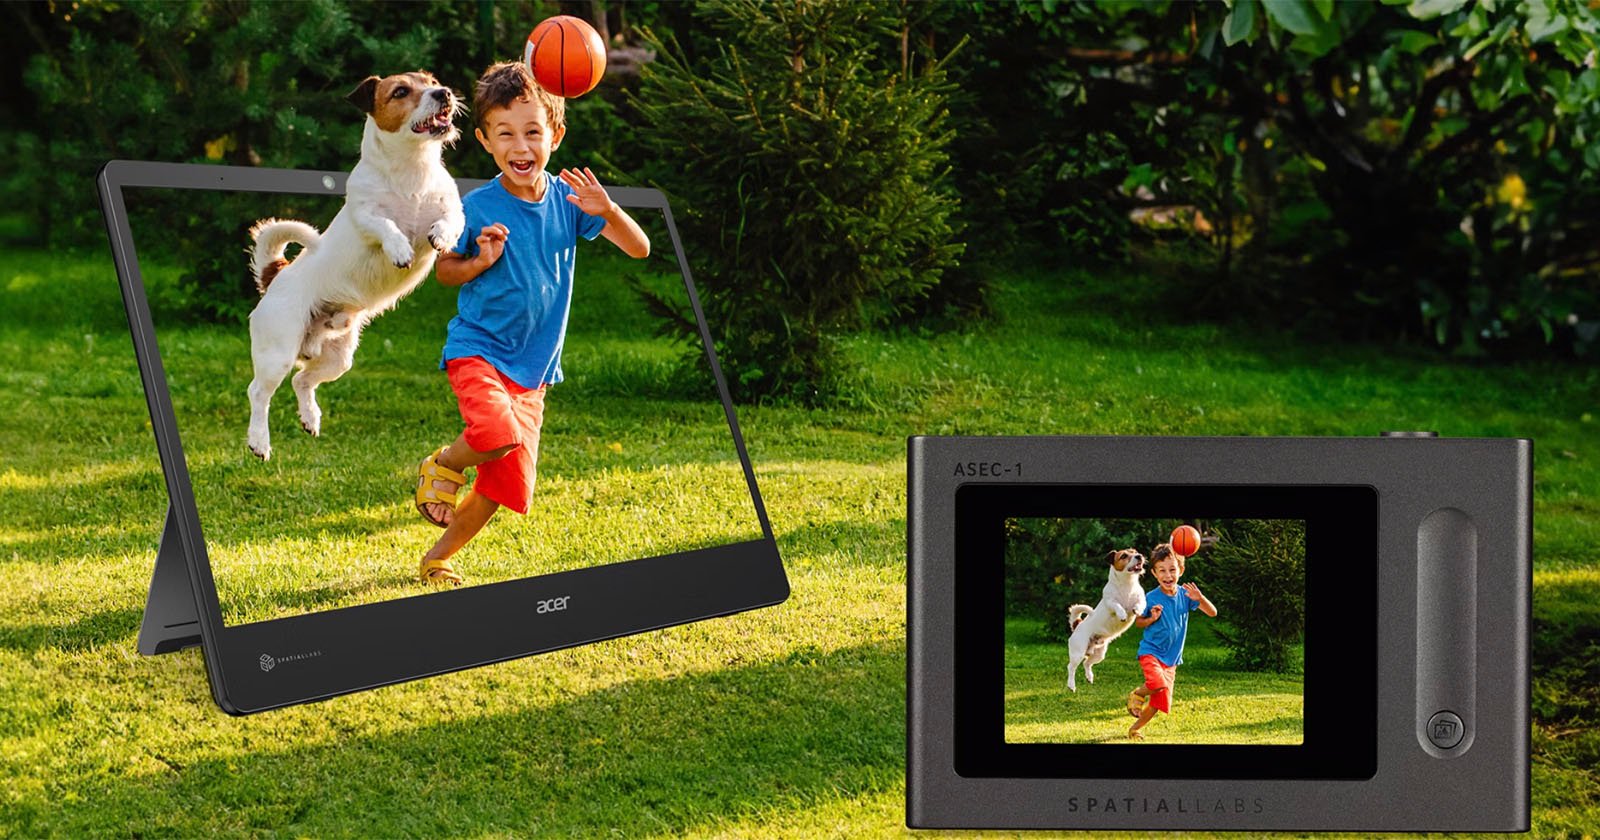 A boy in a blue shirt and red shorts throws a basketball while a playful dog jumps to catch it. This vibrant scene is displayed on an Acer monitor and the Spatial Labs device, giving a 3D effect that makes the boy and dog appear to pop out of the screens.